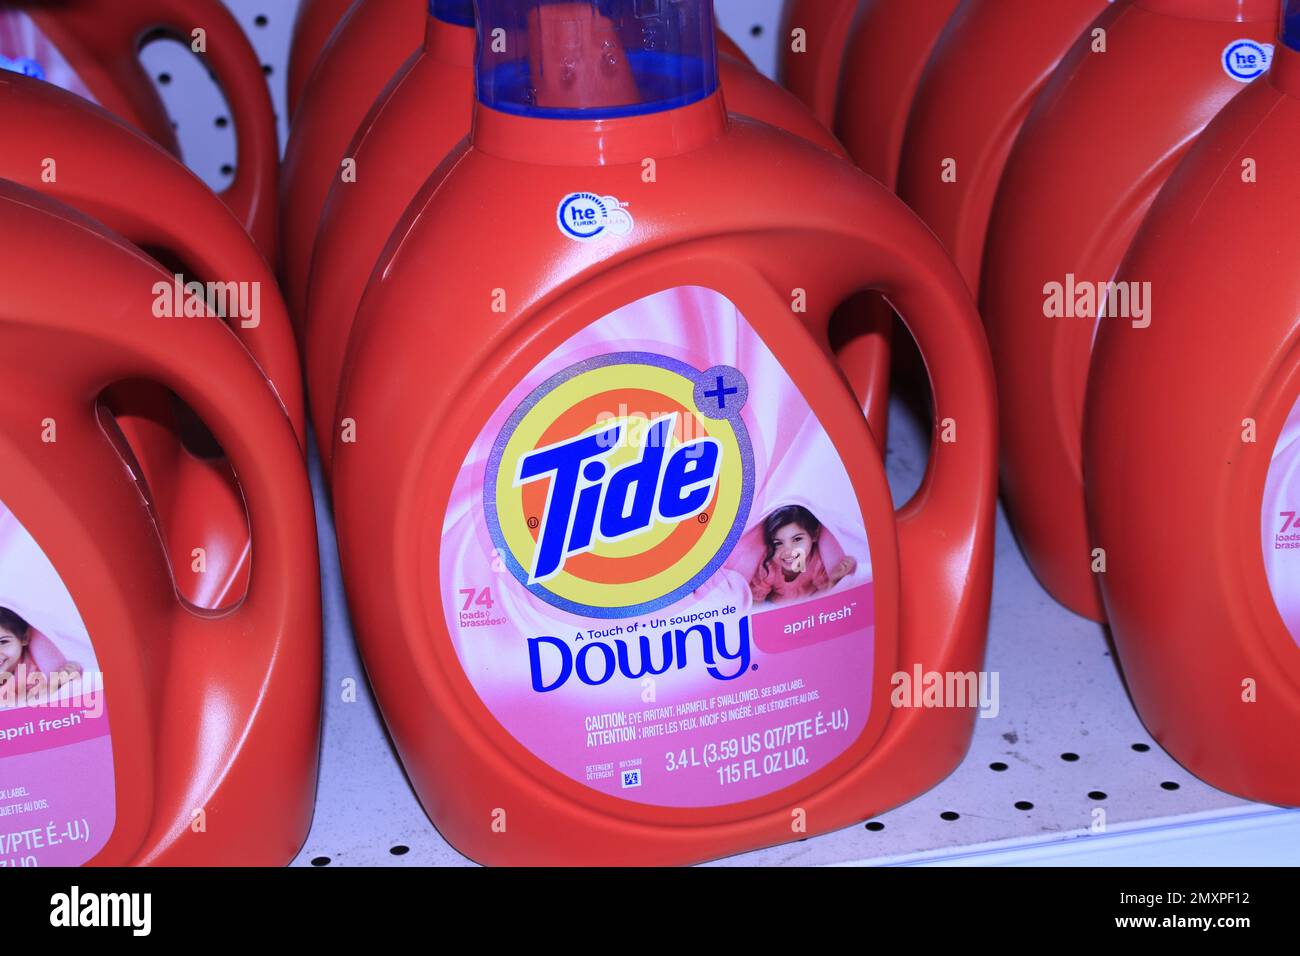 Tide Liquid Laundry Detergent with Touch of Downy, April Fresh, 74